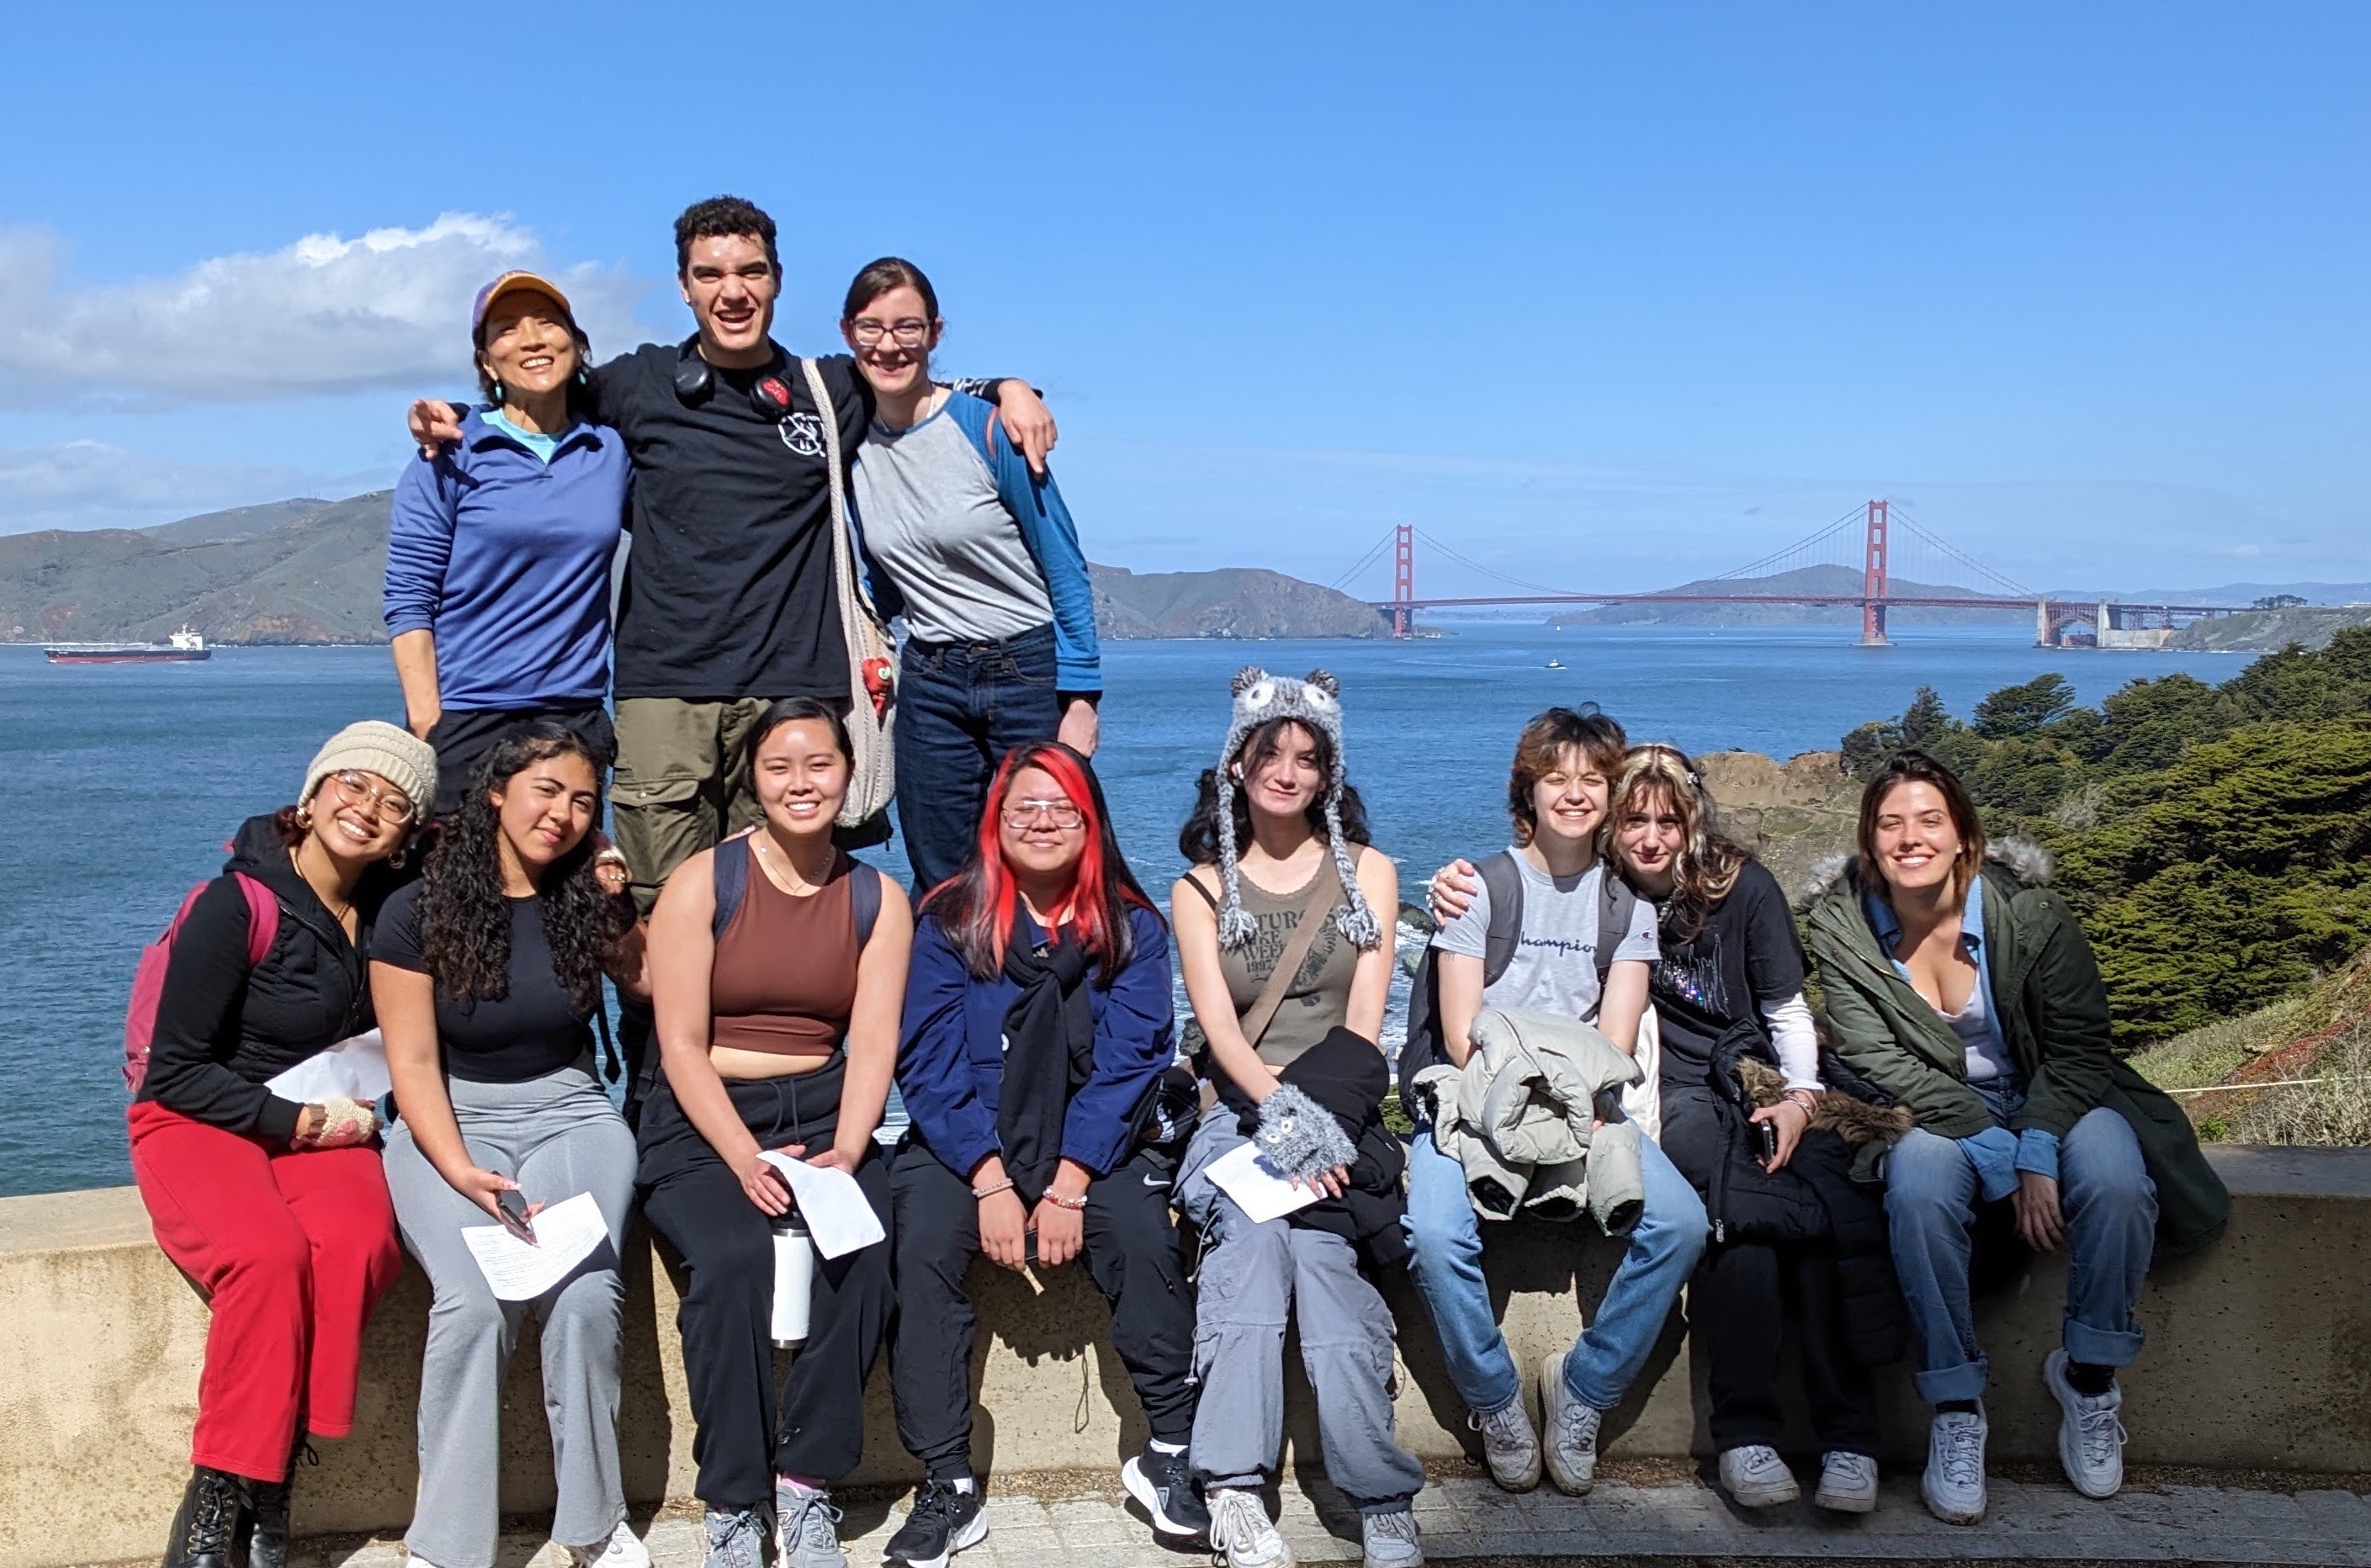 RPT field trip to the Lands End by the Golden Gate Bridge